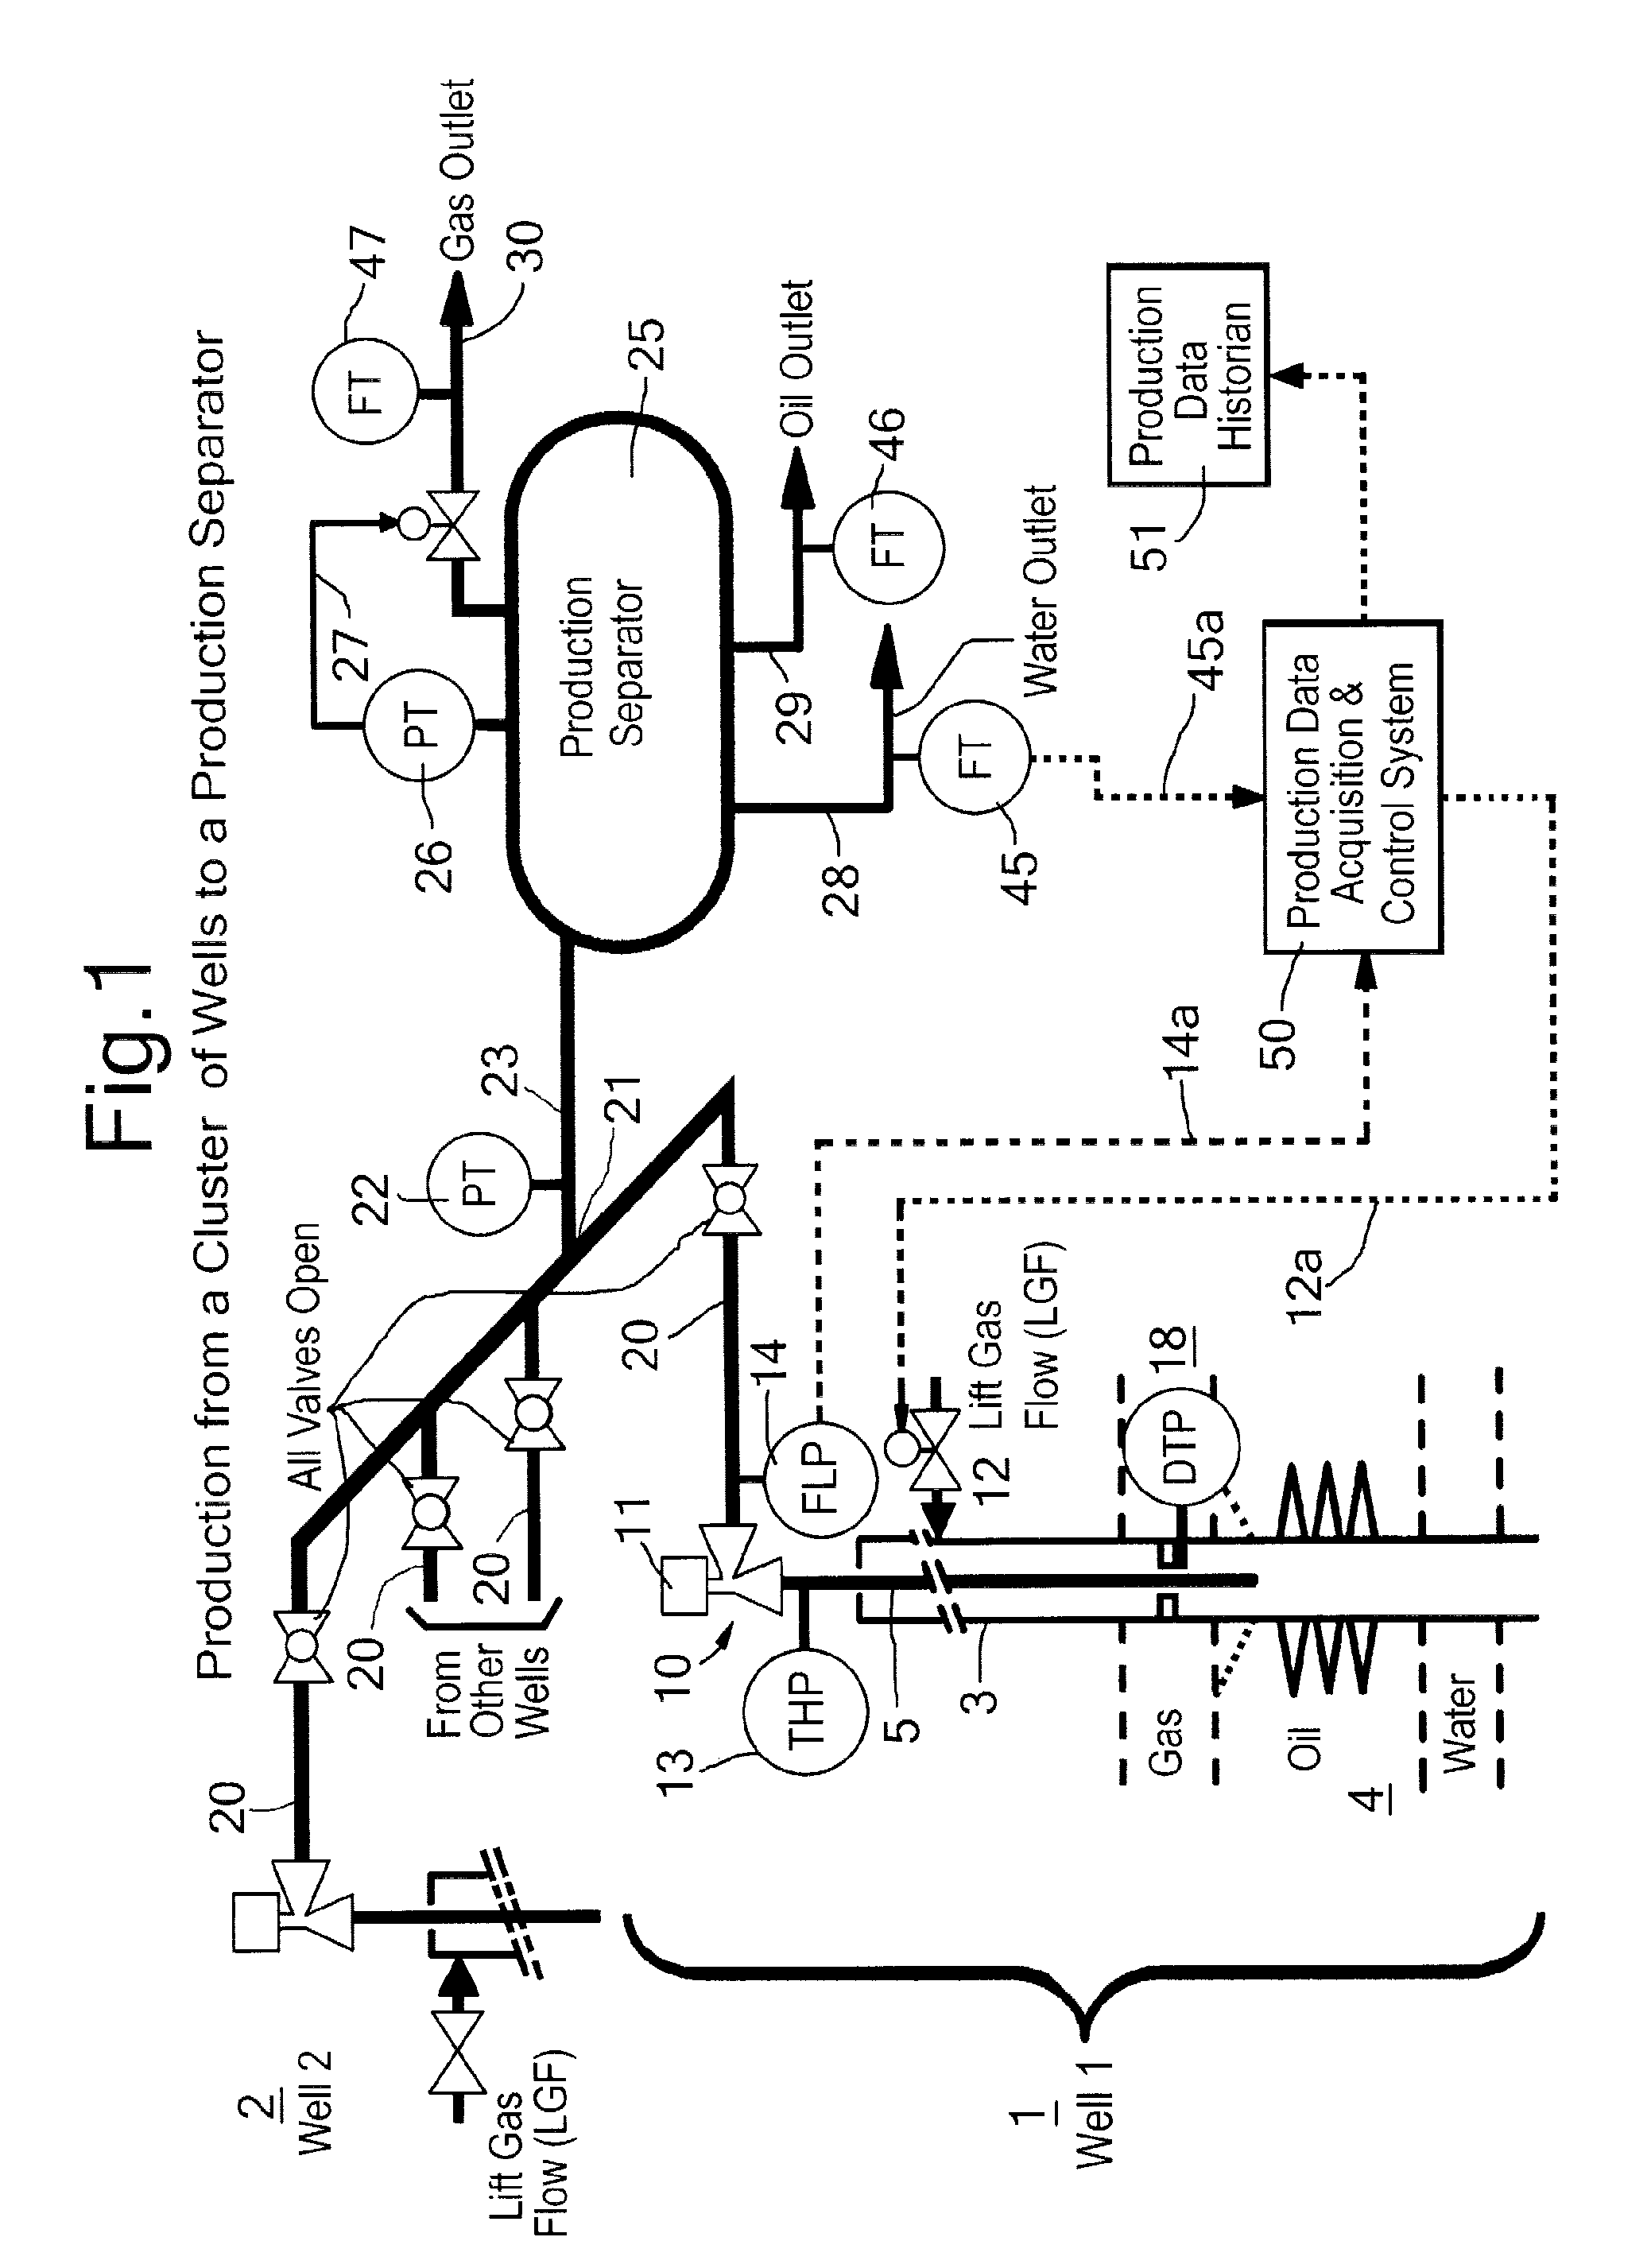 Method for controlling production and downhole pressures of a well with multiple subsurface zones and/or branches